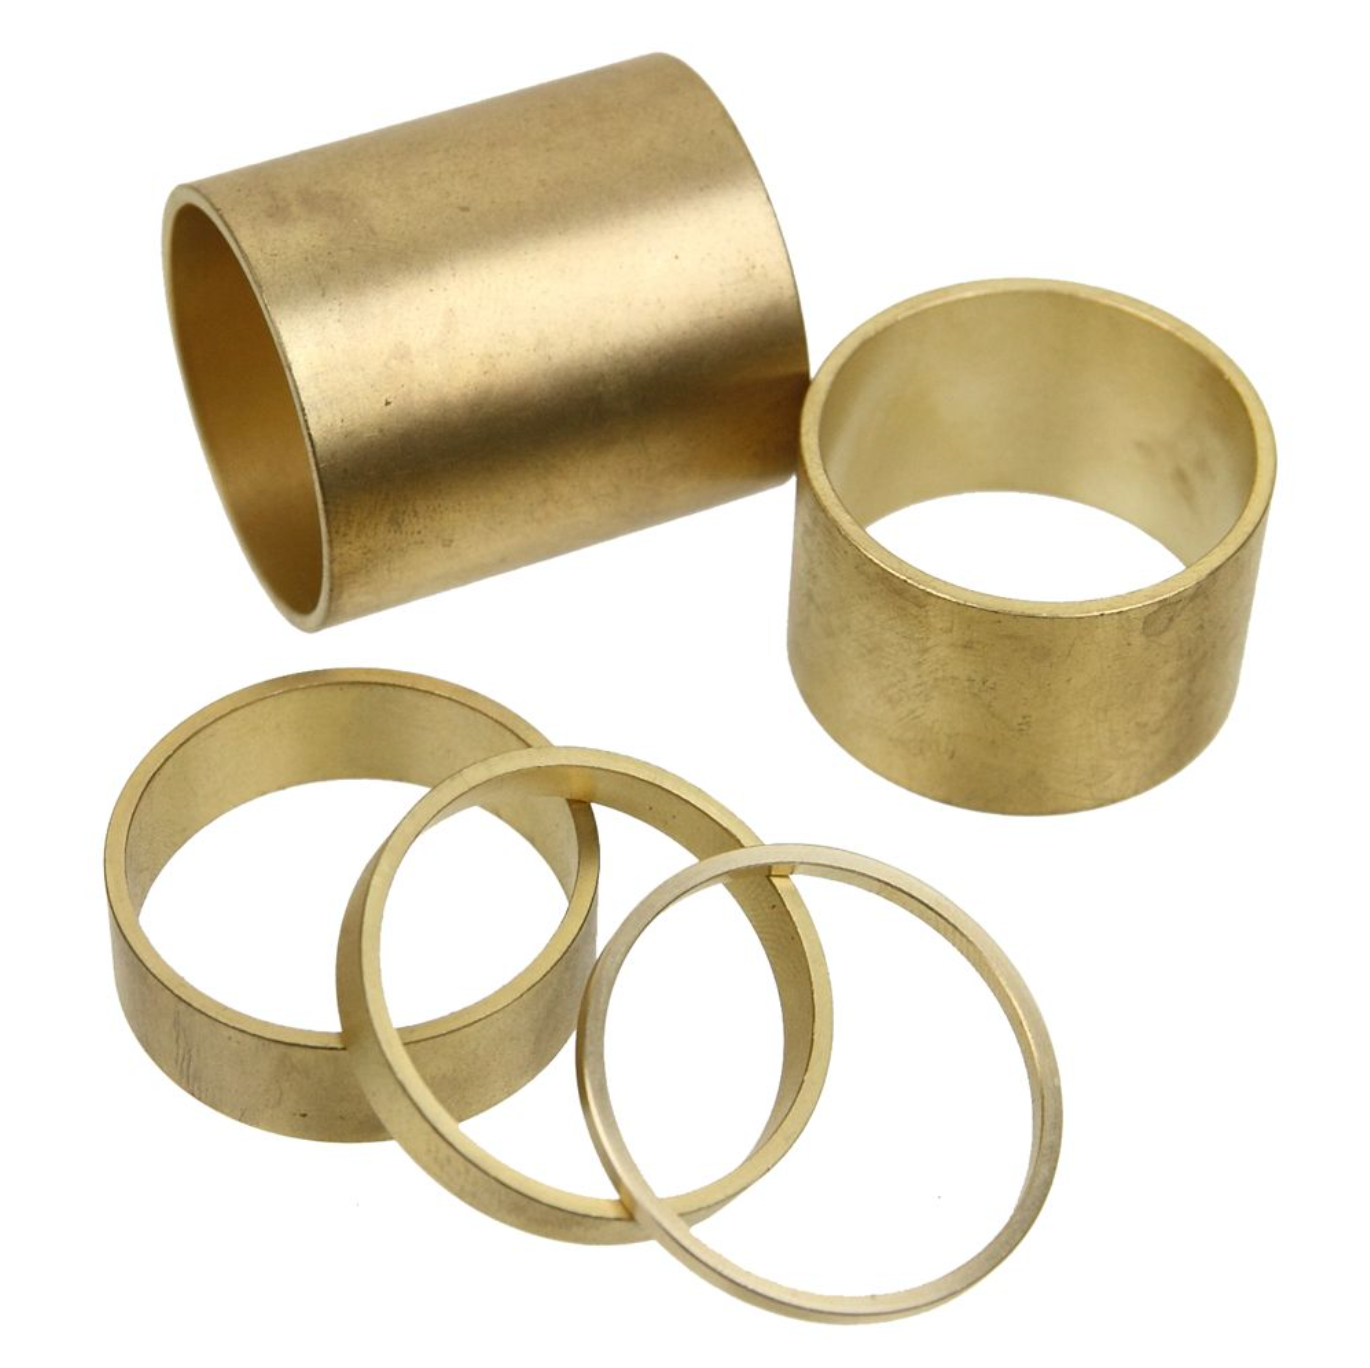 Blue Lug Brass Tapered Spacer - 1-1/8